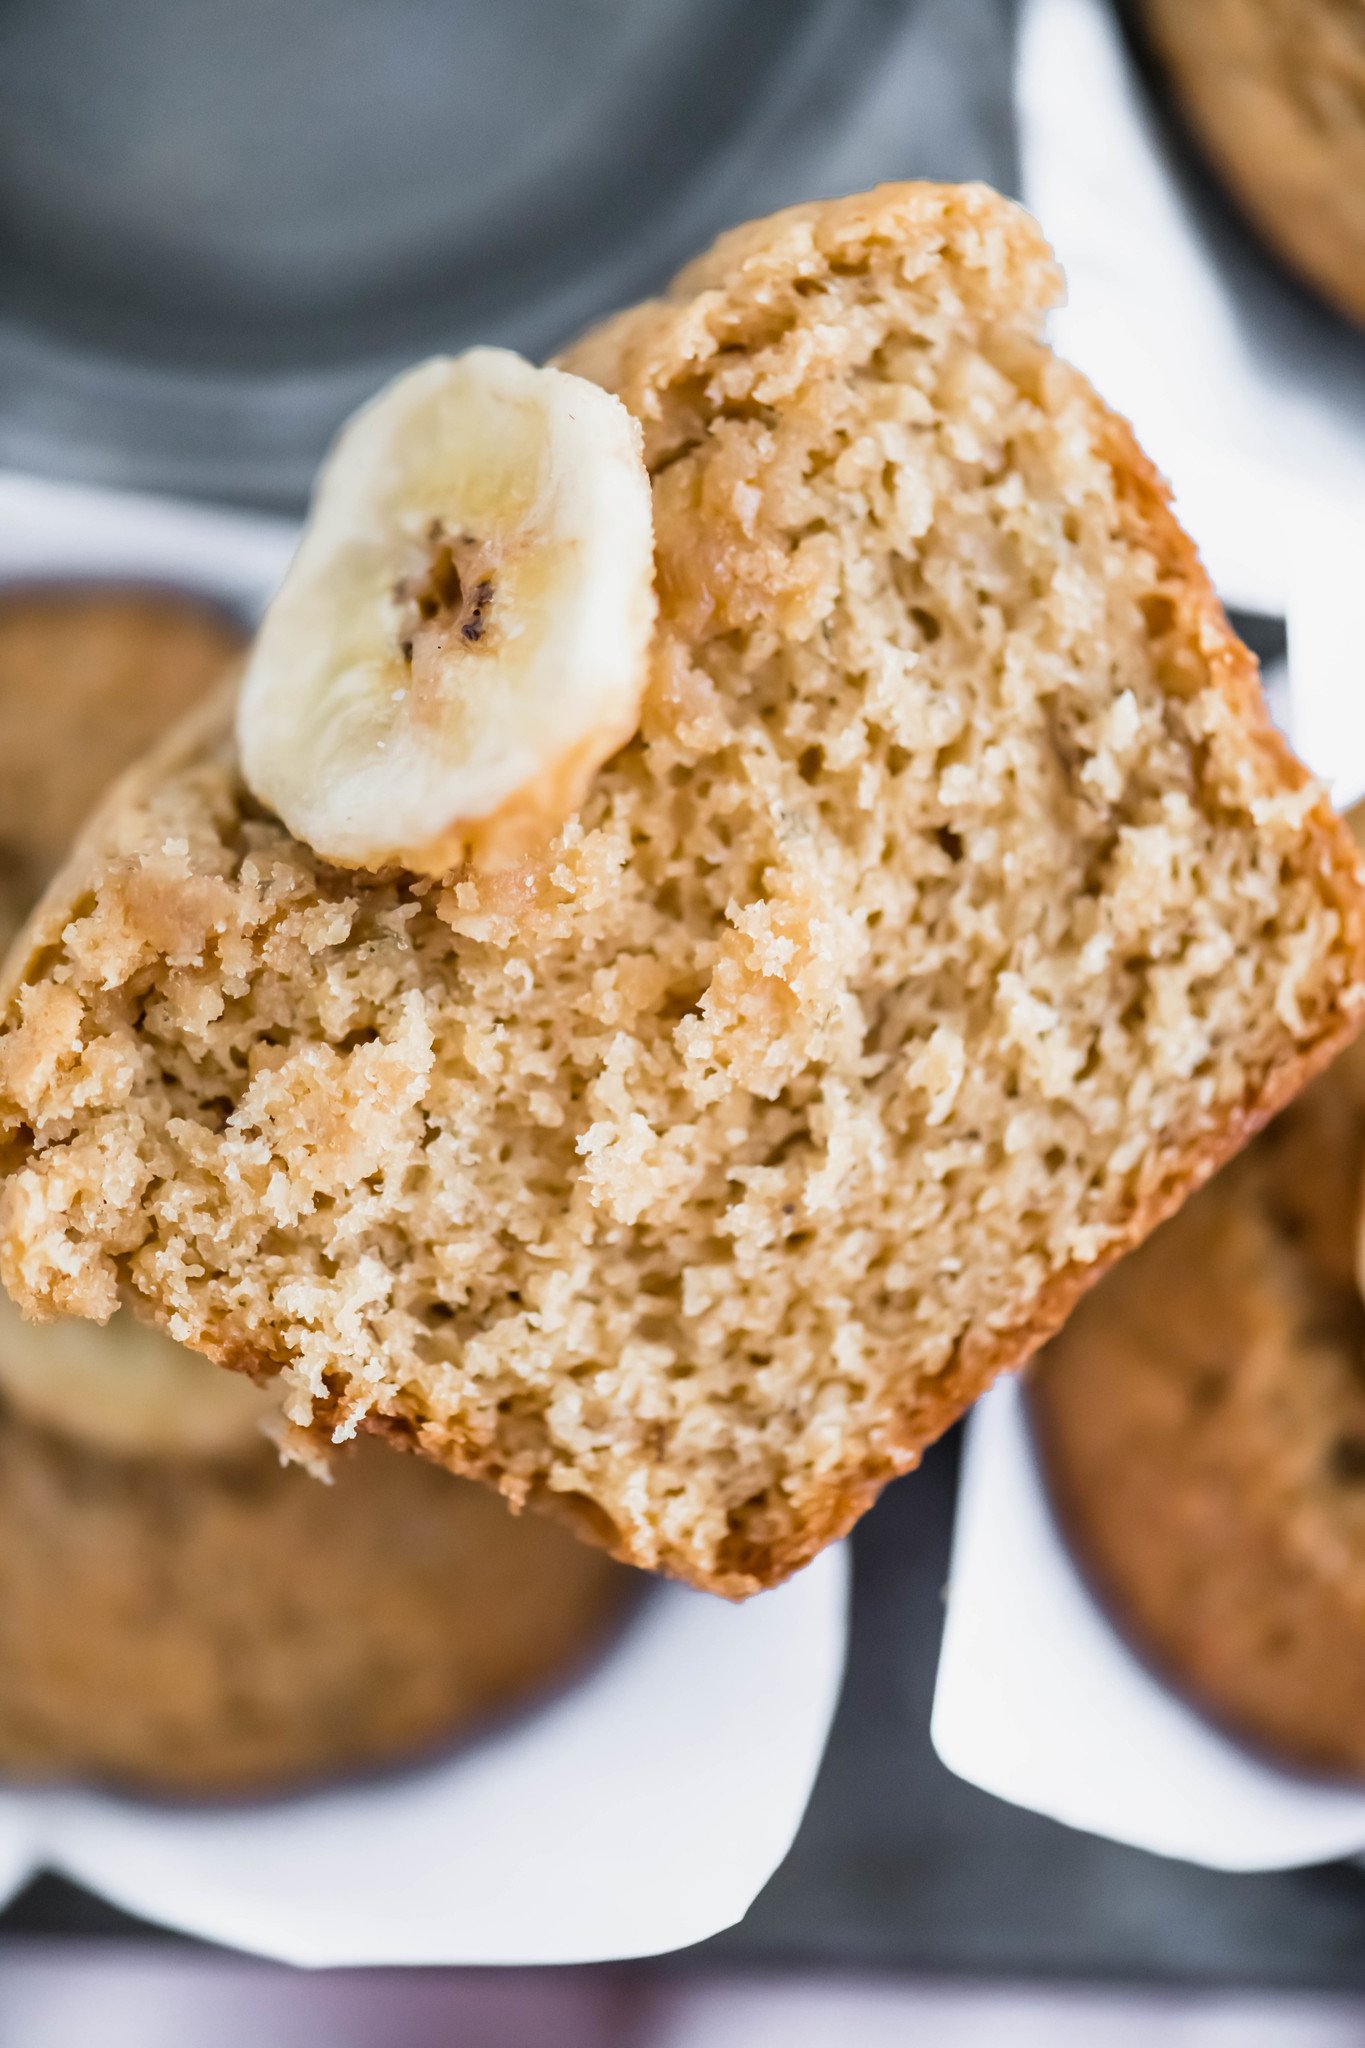 The combination of flavors in these Banana Biscoff Muffins will totally blow your mind. Sweet bananas and cinnamon cookie vibes will quickly become a new favorite.